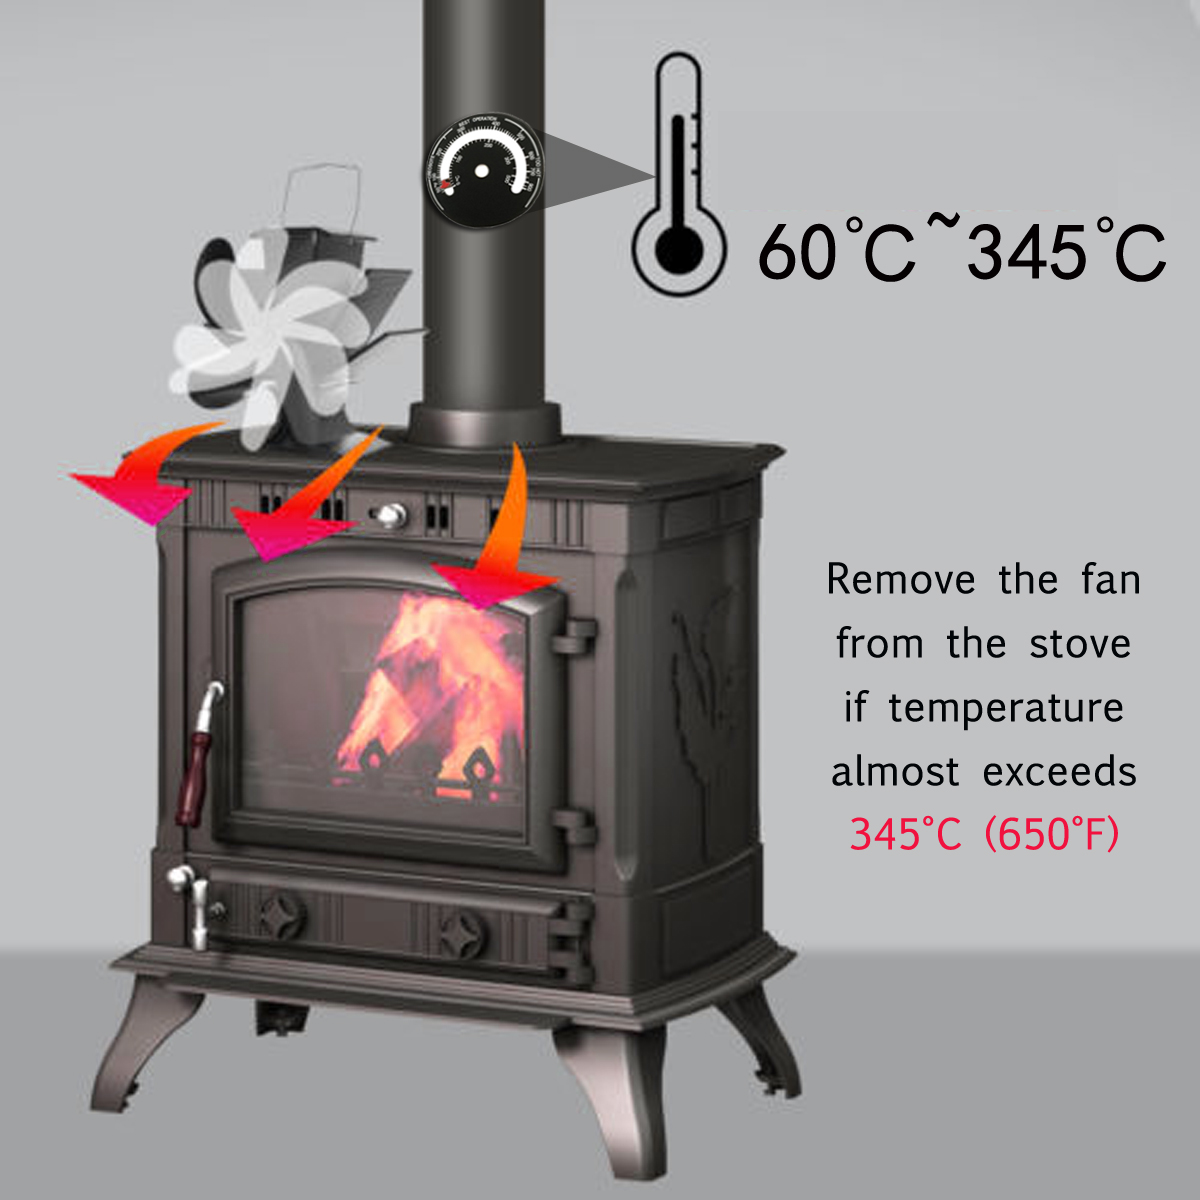 3-Blade-Heat-Powered-Stove-Fan-W-Thermometer-for-Wood-Log-Burning-Burner-Stove-1405753-2